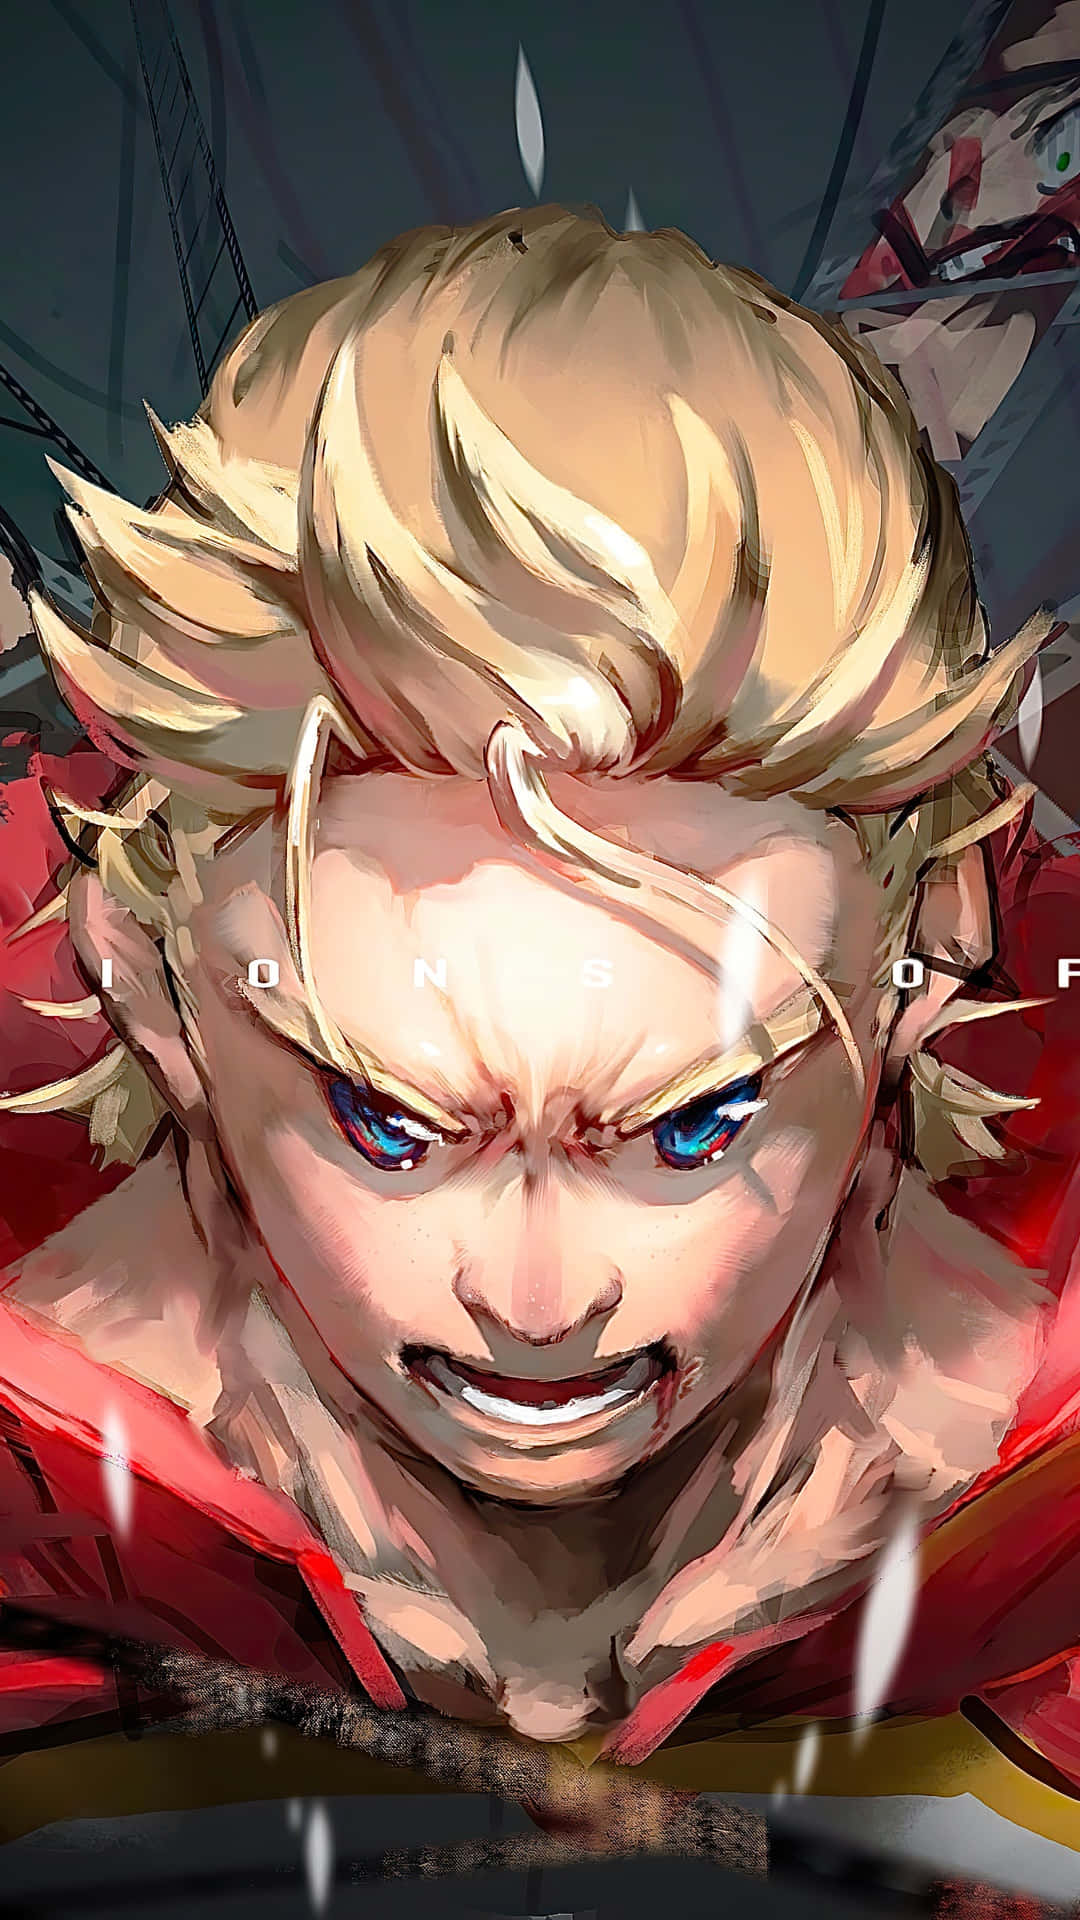 Mirio Togata using his Quirks to save the day Wallpaper